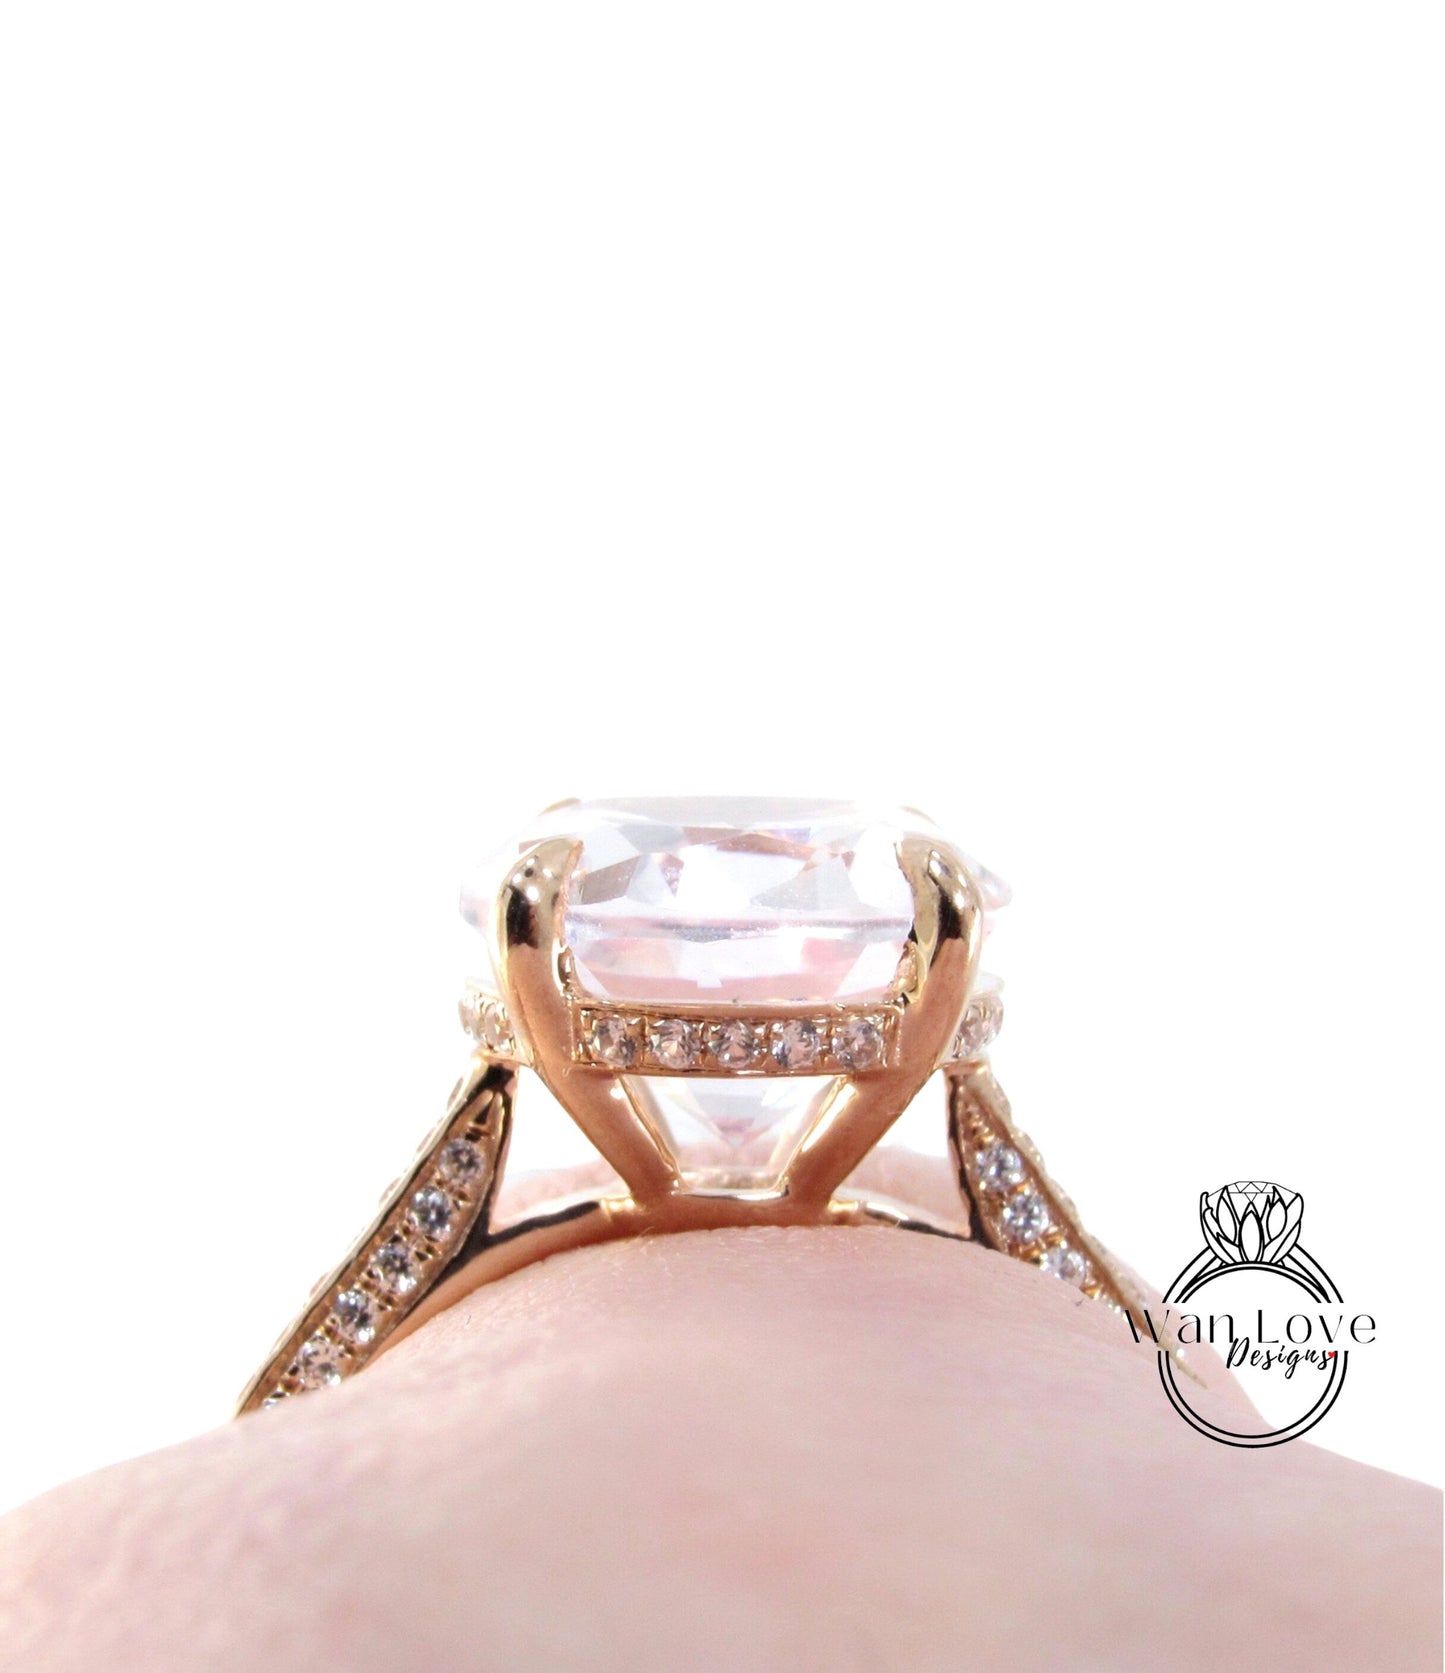 9ct Celebrity style engagement ring Oval Light Pink Sapphire diamond hidden halo rose gold almost eternity band bridal ring Anniversary gift Wan Love Designs